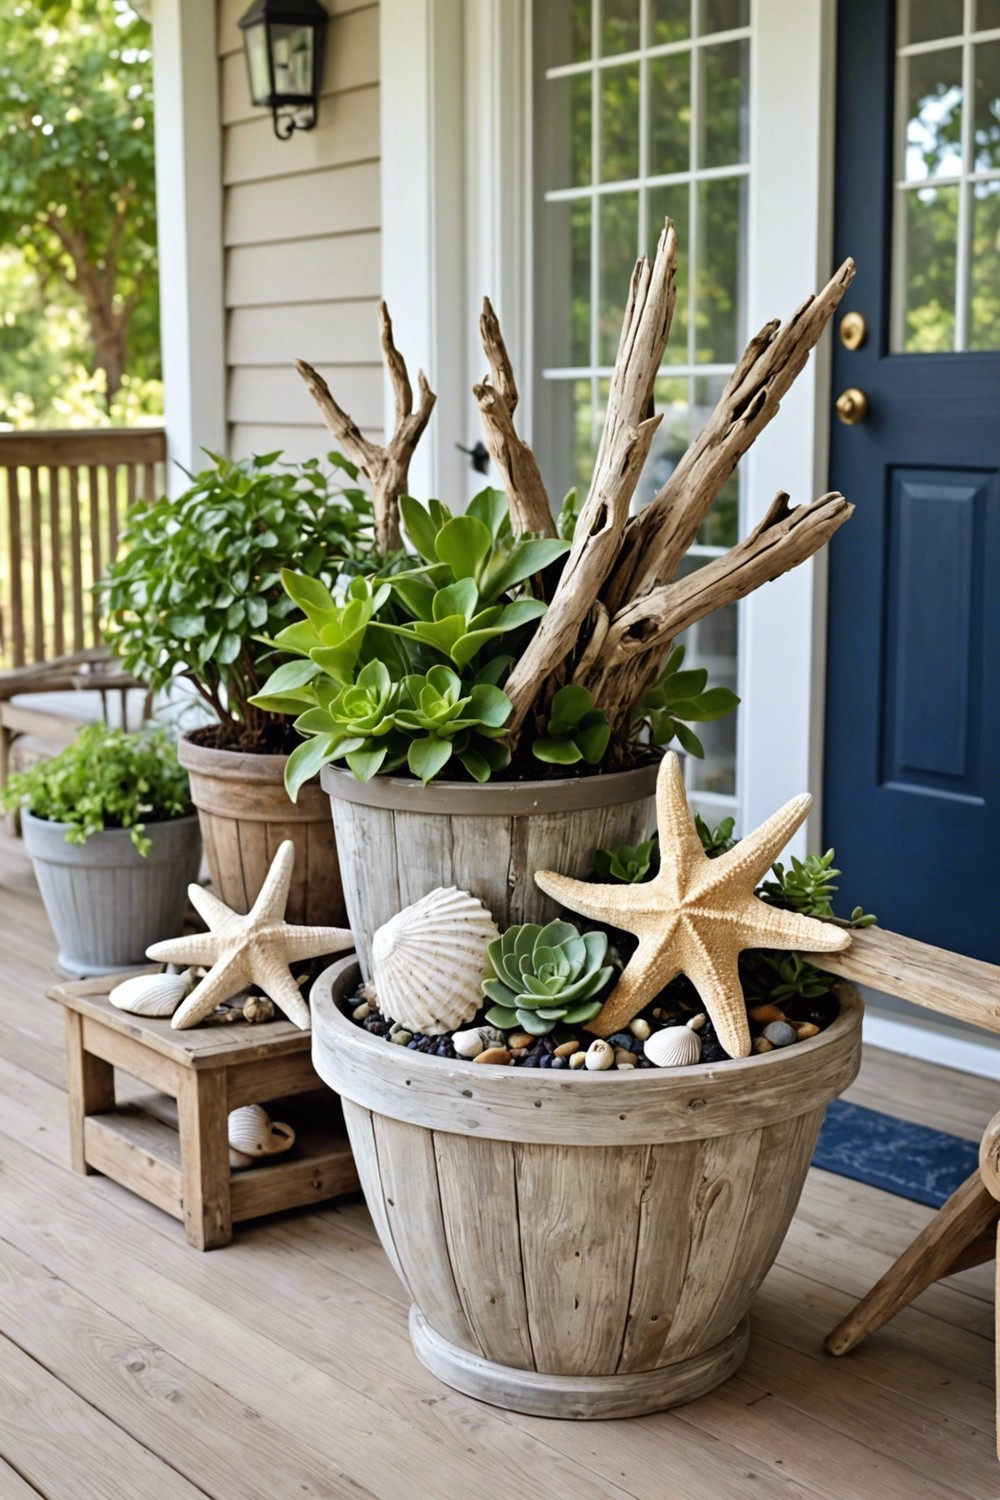 Bring in a Coastal Vibe with Driftwood